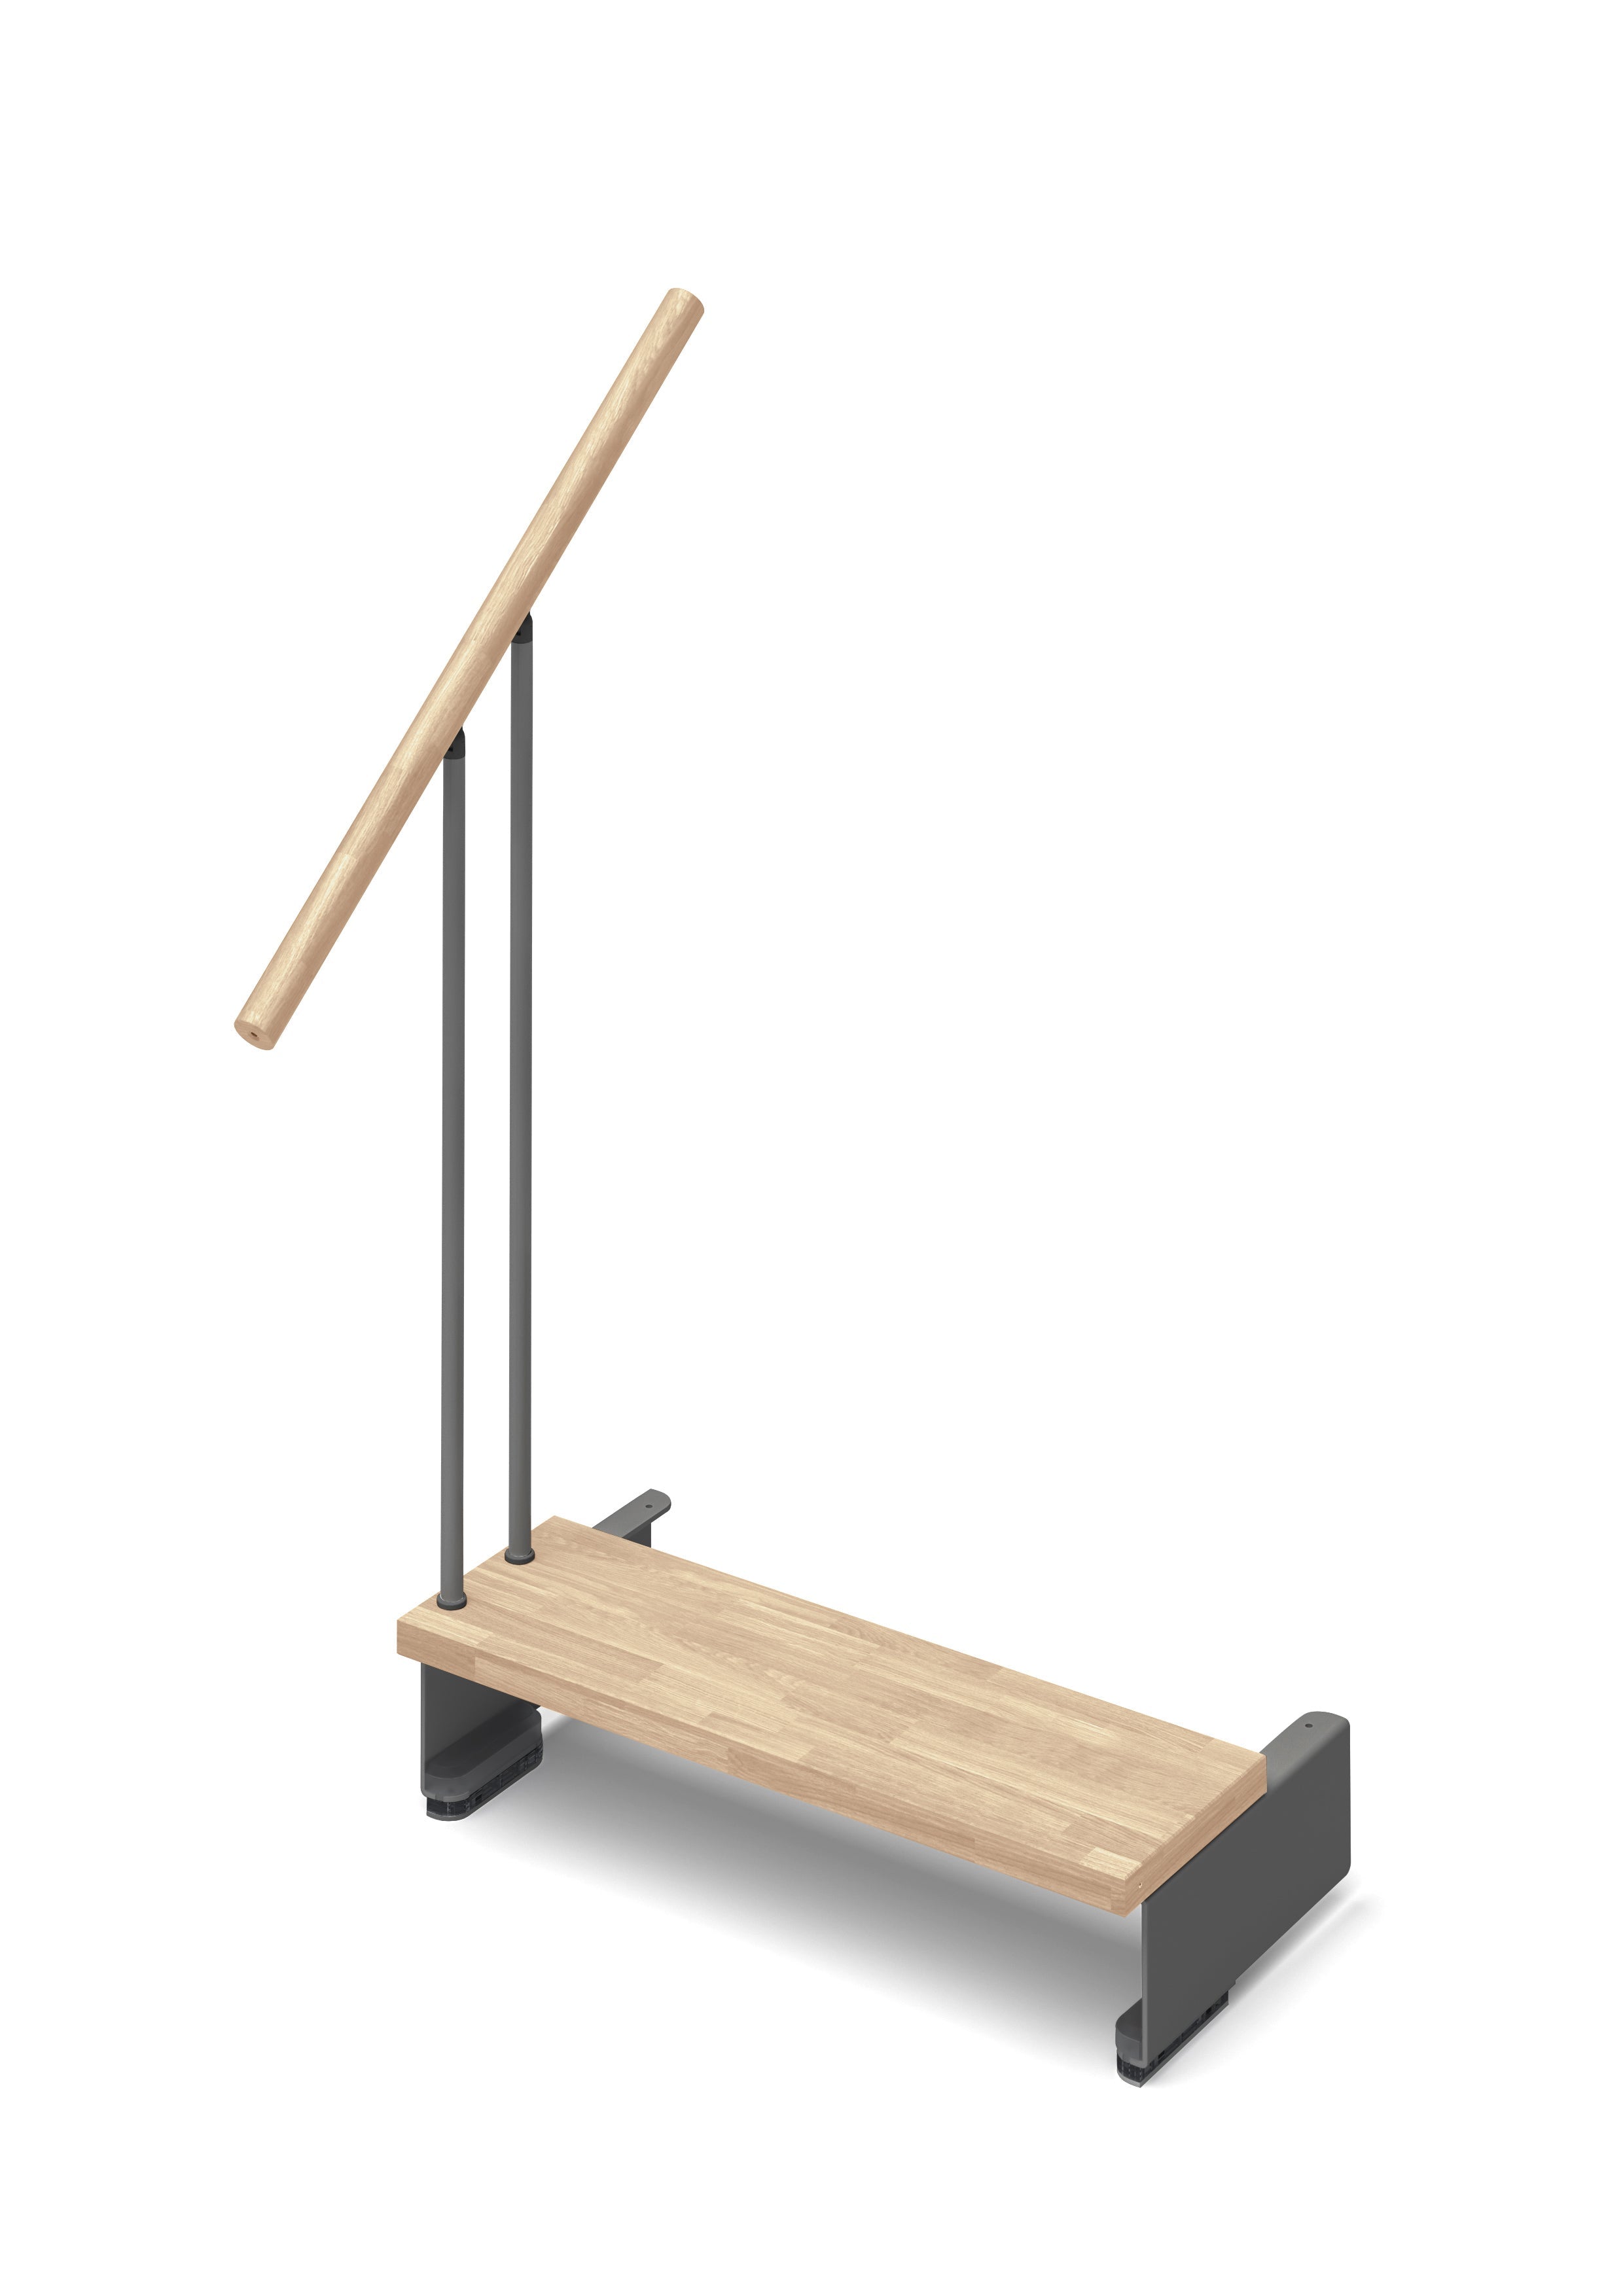 Additional step Adapta 84cm (with structure and railing) - Sand 27